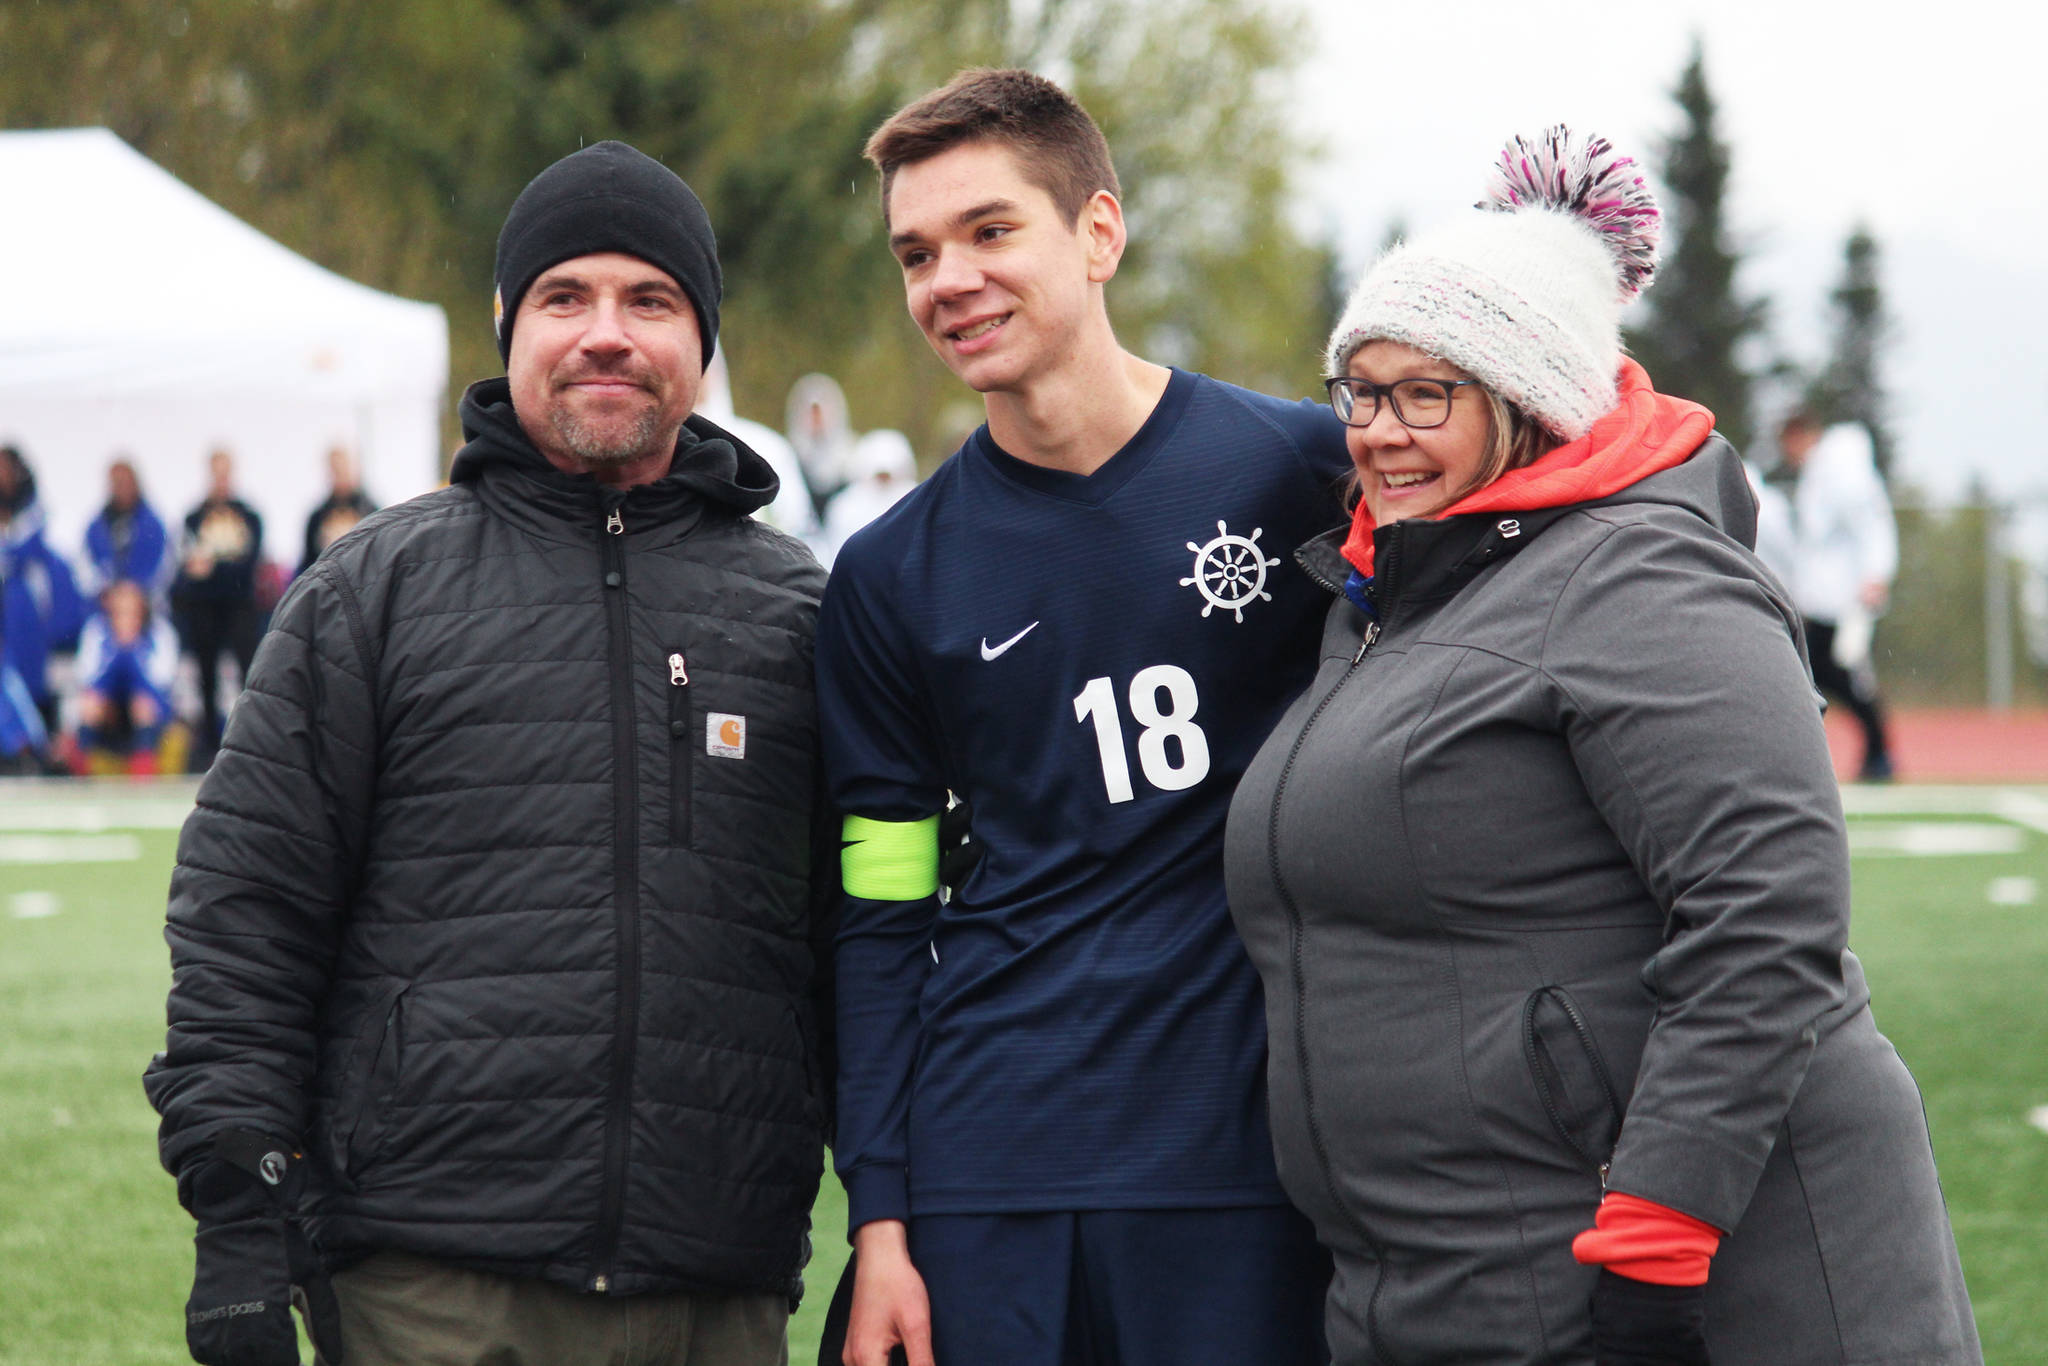 Midfielder Desmond VanLiere stands with his parents to be recognized during a Senior Night celebration Friday, May 10, 2019 between soccer games at Homer High School in Homer, Alaska. (Photo by Megan Pacer/Homer News)